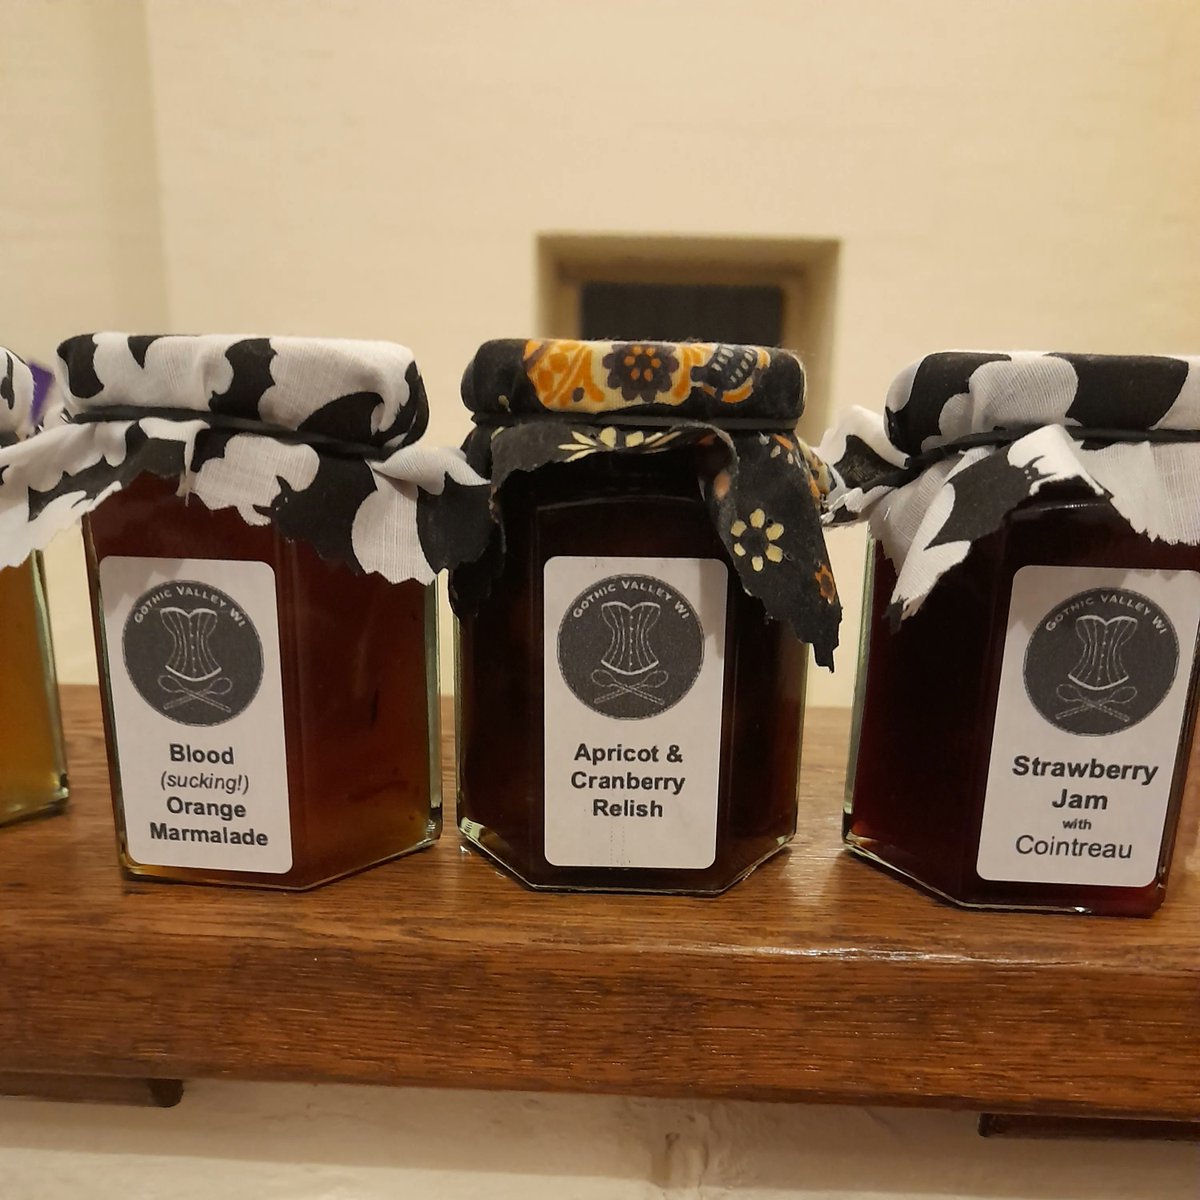 Our Crafty Goths have some serious skills, from #quilting to #jewellerymaking & everything in between.🧵 Behold some of our #GVWI jams & blood 'sucking' orange marmalade made by our president Sarah's own fair hands. Well, we do put the black in blackberry jam! #GVWI #craftygoth